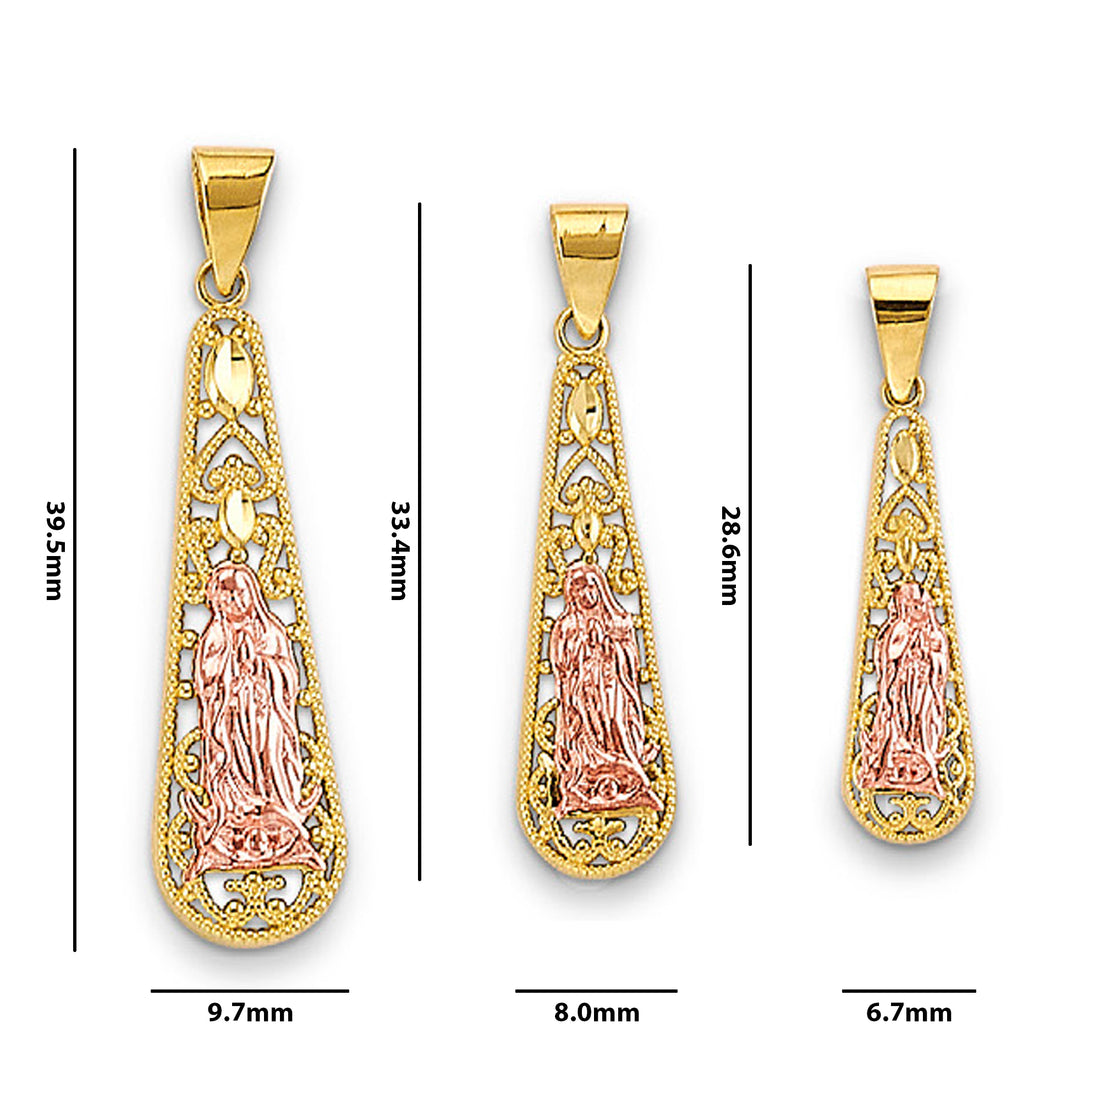 Two Tone Gold Elongated Teardrop Shaped Lady of Guadalupe Pendant with Measurement